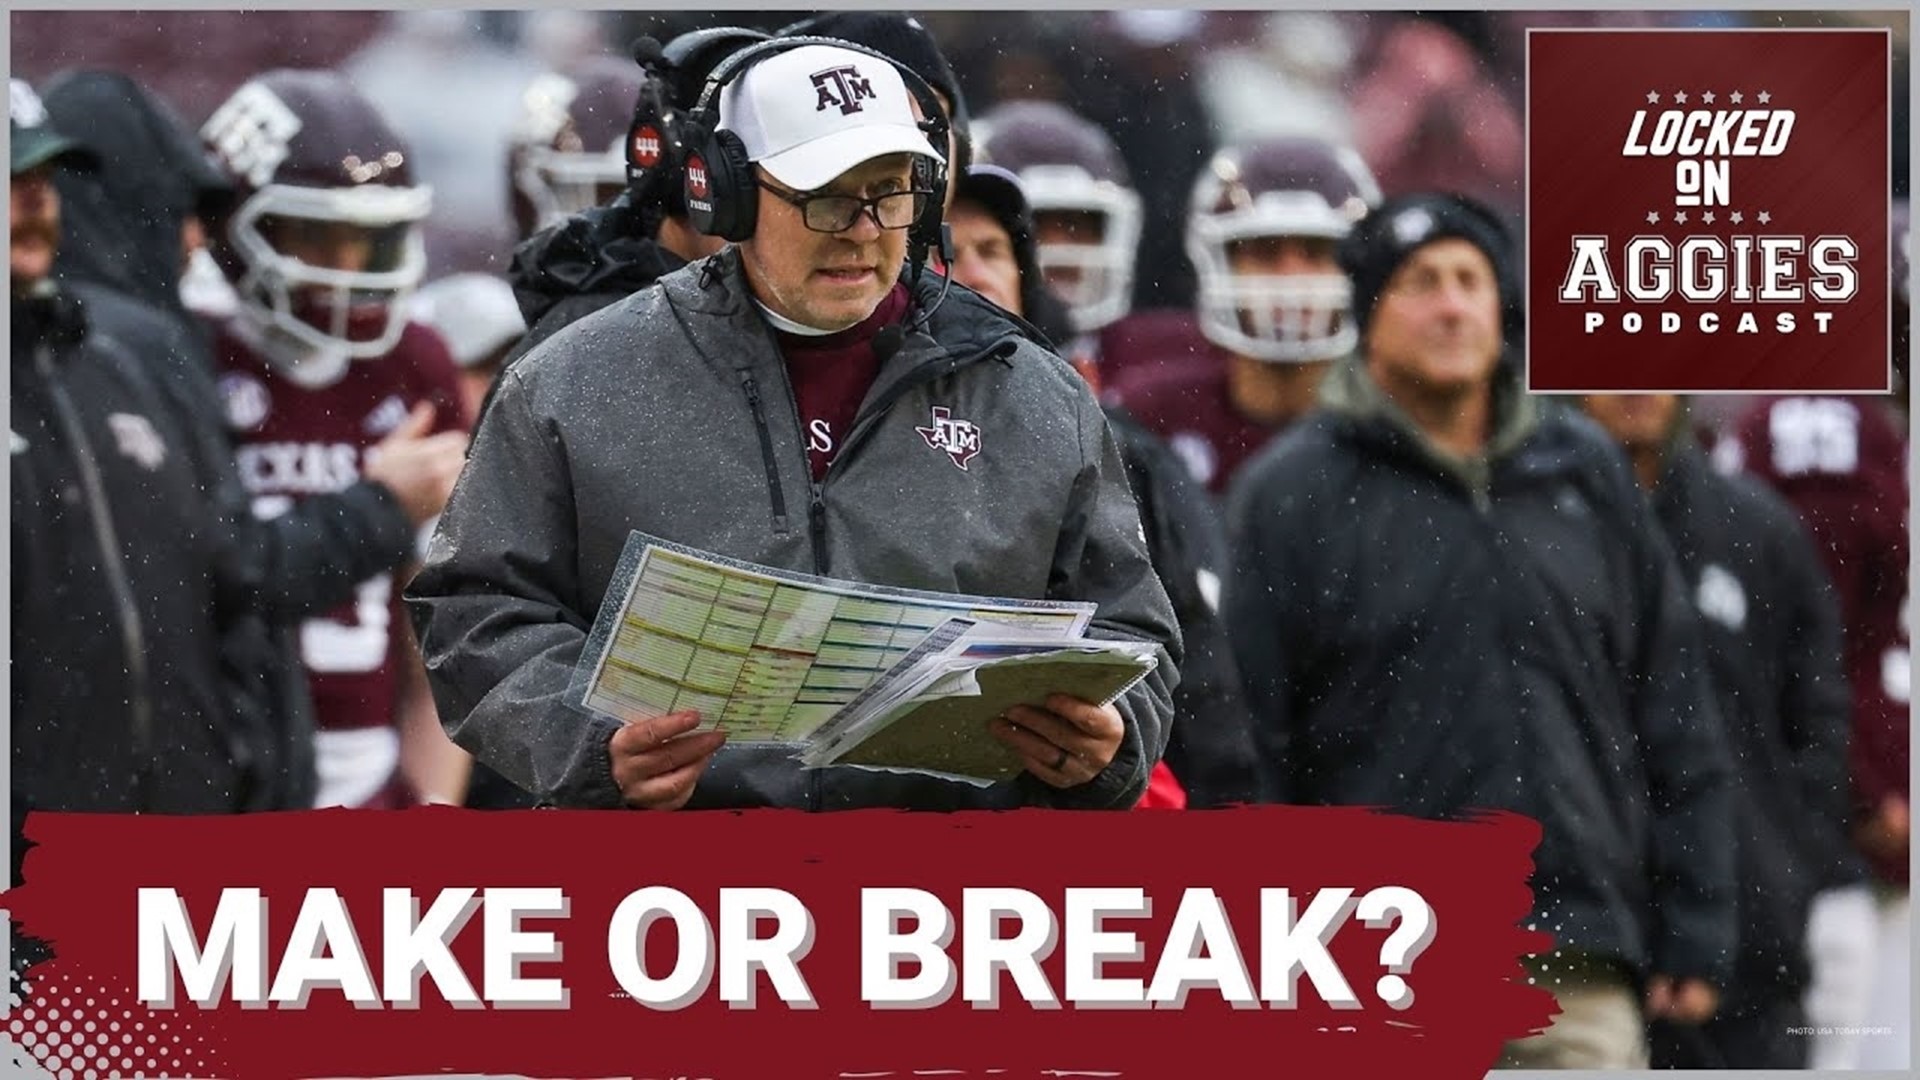 On this episode of Locked On Aggies, host Andrew Stefaniak discusses how the 2023 season will be big for Jimbo Fisher's future in College Station.